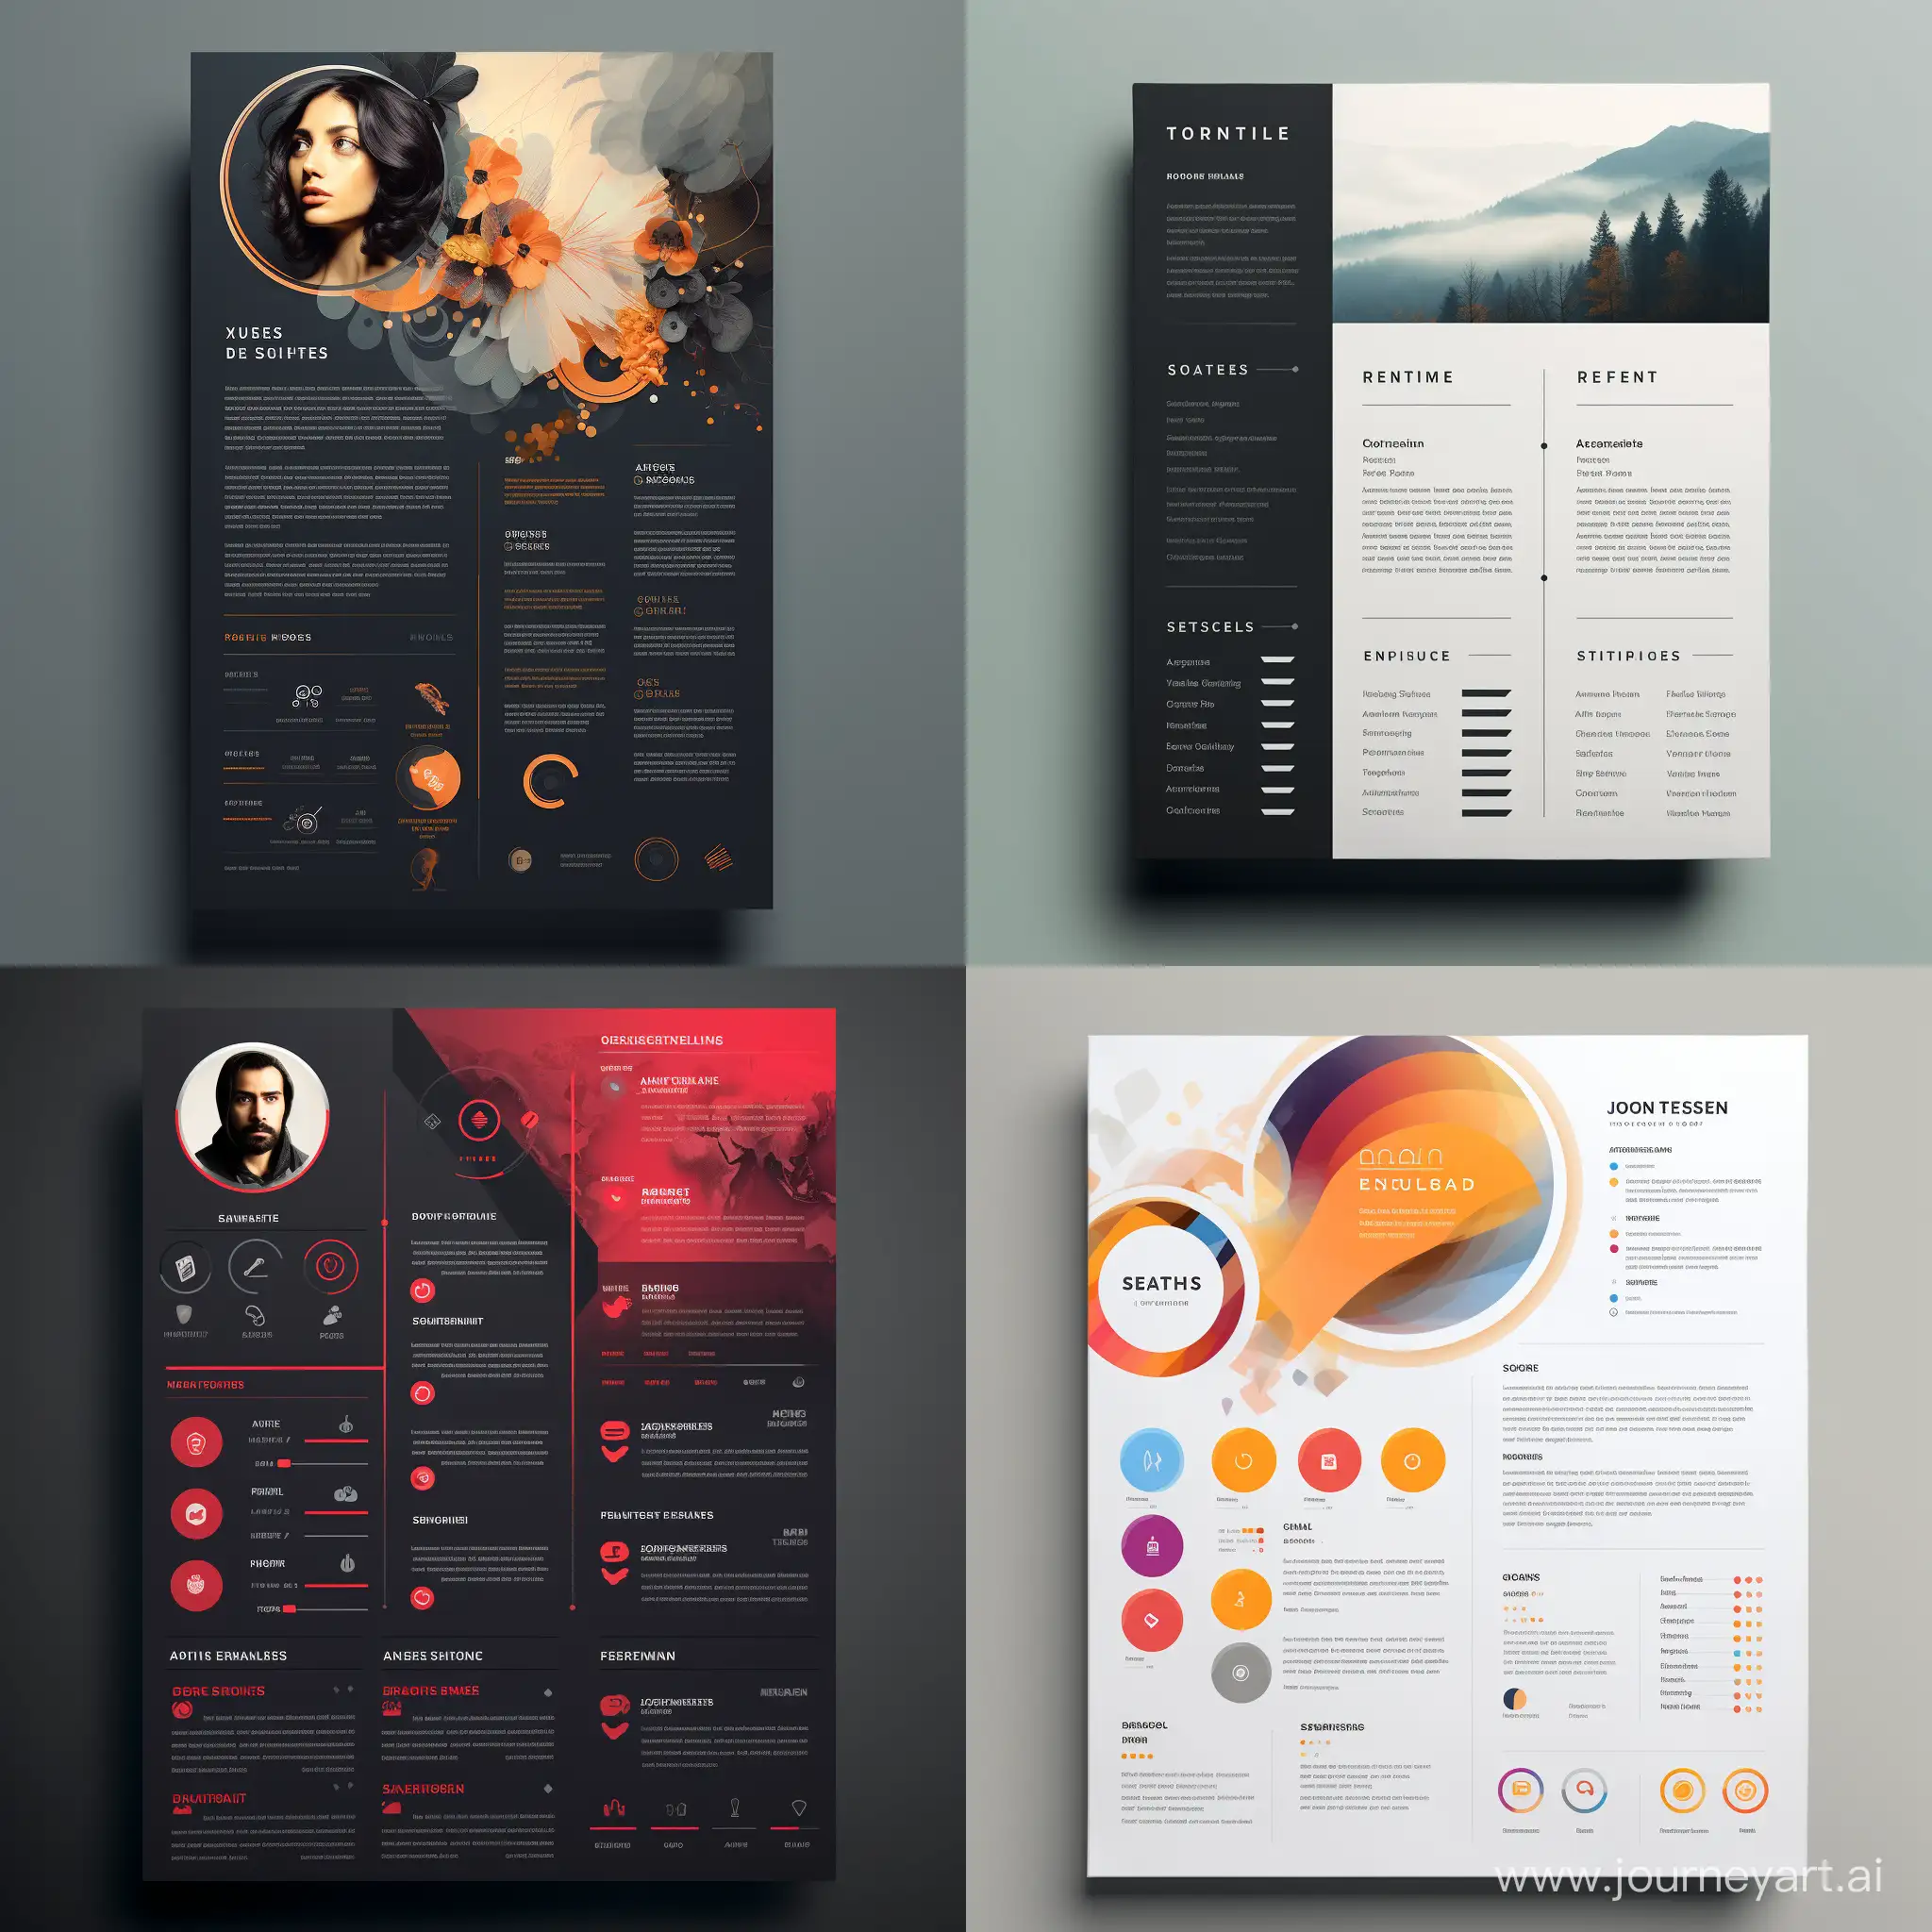 design an amazing resume that will get you noticed